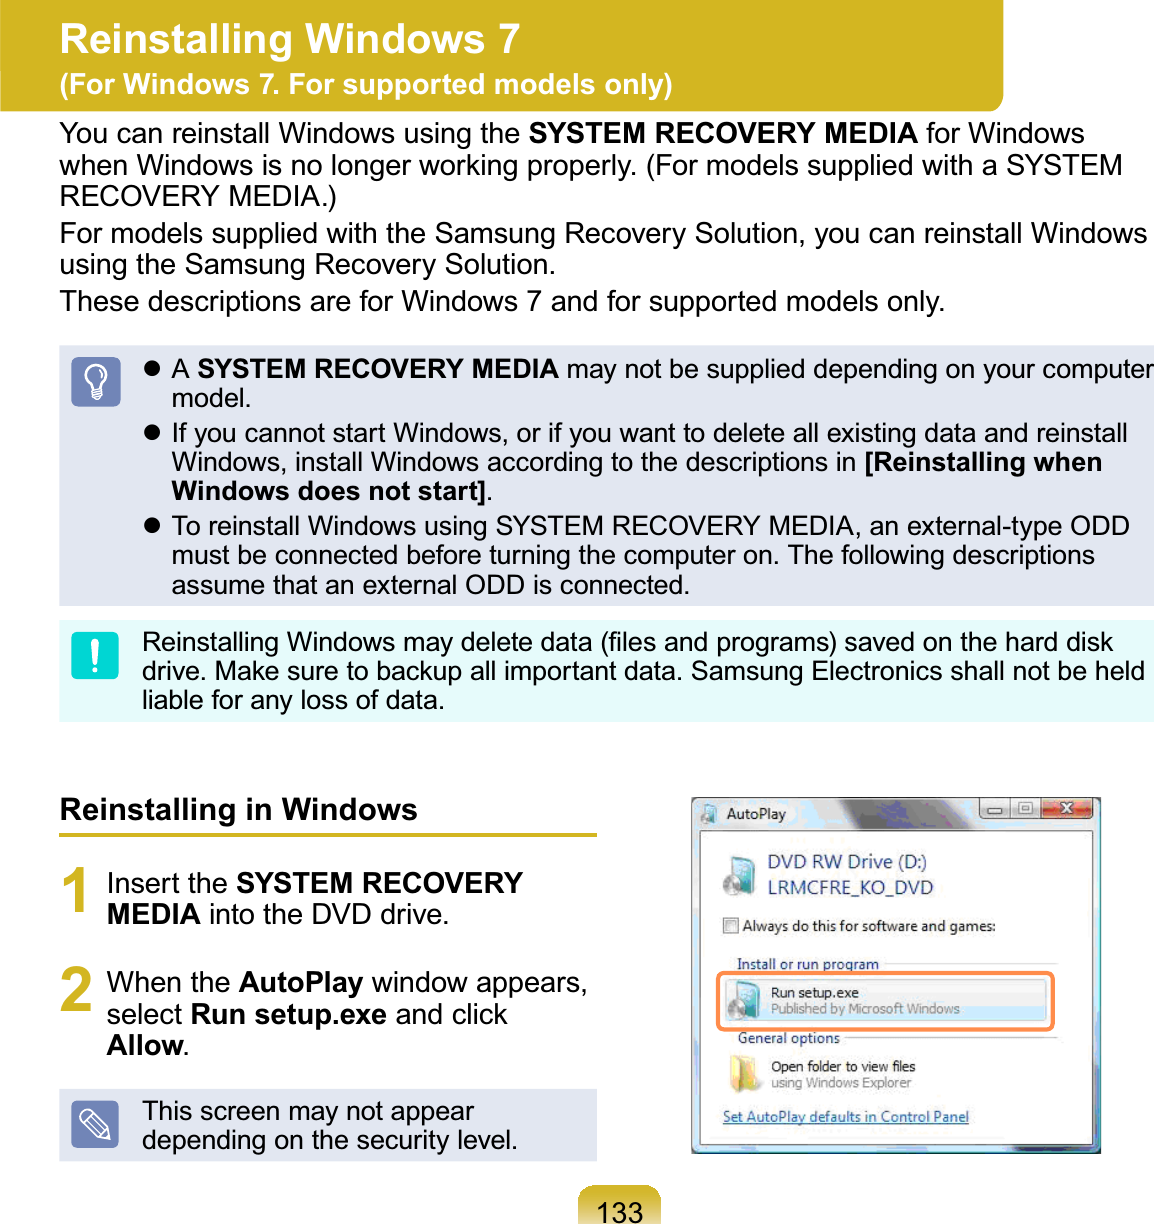 133Reinstalling in Windows1 Insert the SYSTEM RECOVERY MEDIA into the DVD drive.2 When the AutoPlay window appears,select Run setup.exeDQGFOLFNAllow.This screen may not appeardependingonthesecuritylevel.Reinstalling Windows 7 (For Windows 7. For supported models only)You can reinstall Windows using the SYSTEM RECOVERY MEDIA for WindowsZKHQ:LQGRZVLVQRORQJHUZRUNLQJSURSHUO\)RUPRGHOVVXSSOLHGZLWKD6&lt;67(0RECOVERY MEDIA.)For models supplied with the Samsung Recovery Solution, you can reinstall WindowsusingtheSamsungRecoverySolution.ThesedescriptionsareforWindows7andforsupportedmodelsonly.z A SYSTEM RECOVERY MEDIA maynotbesupplieddependingonyourcomputermodel.z IfyoucannotstartWindows,orifyouwanttodeleteallexistingdataandreinstallWindows, install Windows according to the descriptions in [Reinstalling when Windows does not start].z To reinstall Windows using SYSTEM RECOVERY MEDIA, an external-type ODDmust be connected before turning the computer on. The following descriptionsassume that an external ODD is connected.5HLQVWDOOLQJ:LQGRZVPD\GHOHWHGDWD¿OHVDQGSURJUDPVVDYHGRQWKHKDUGGLVNGULYH0DNHVXUHWREDFNXSDOOLPSRUWDQWGDWD6DPVXQJ(OHFWURQLFVVKDOOQRWEHKHOGliable for any loss of data.